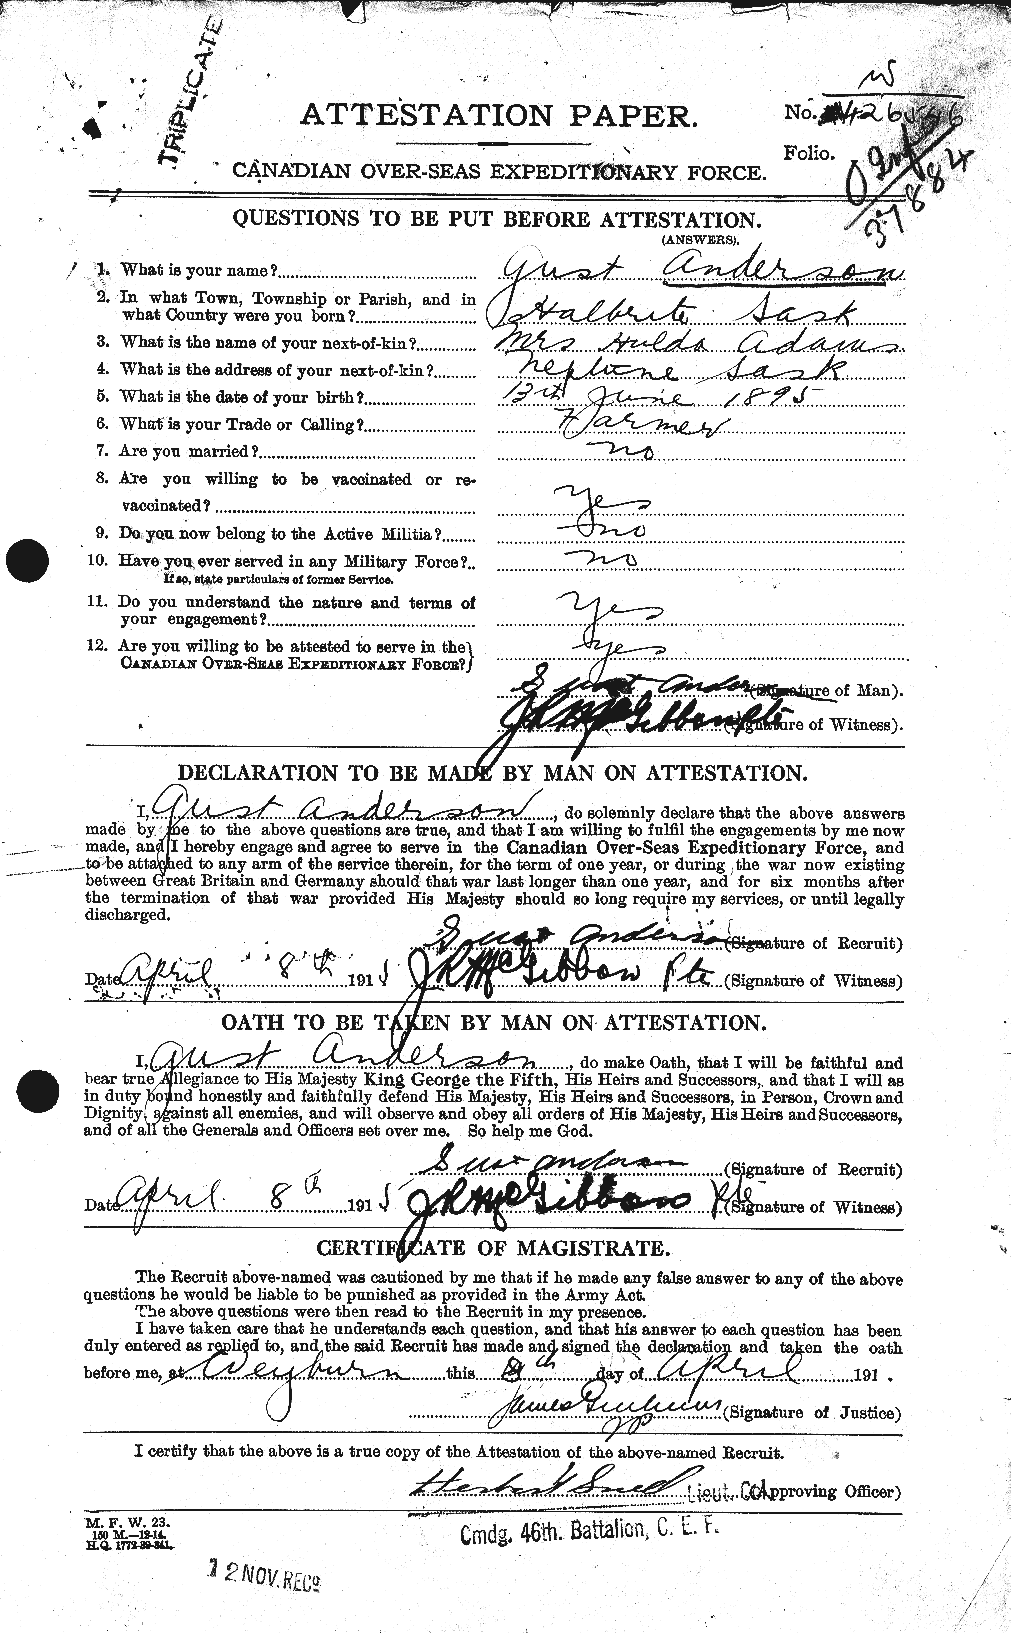 Personnel Records of the First World War - CEF 209654a